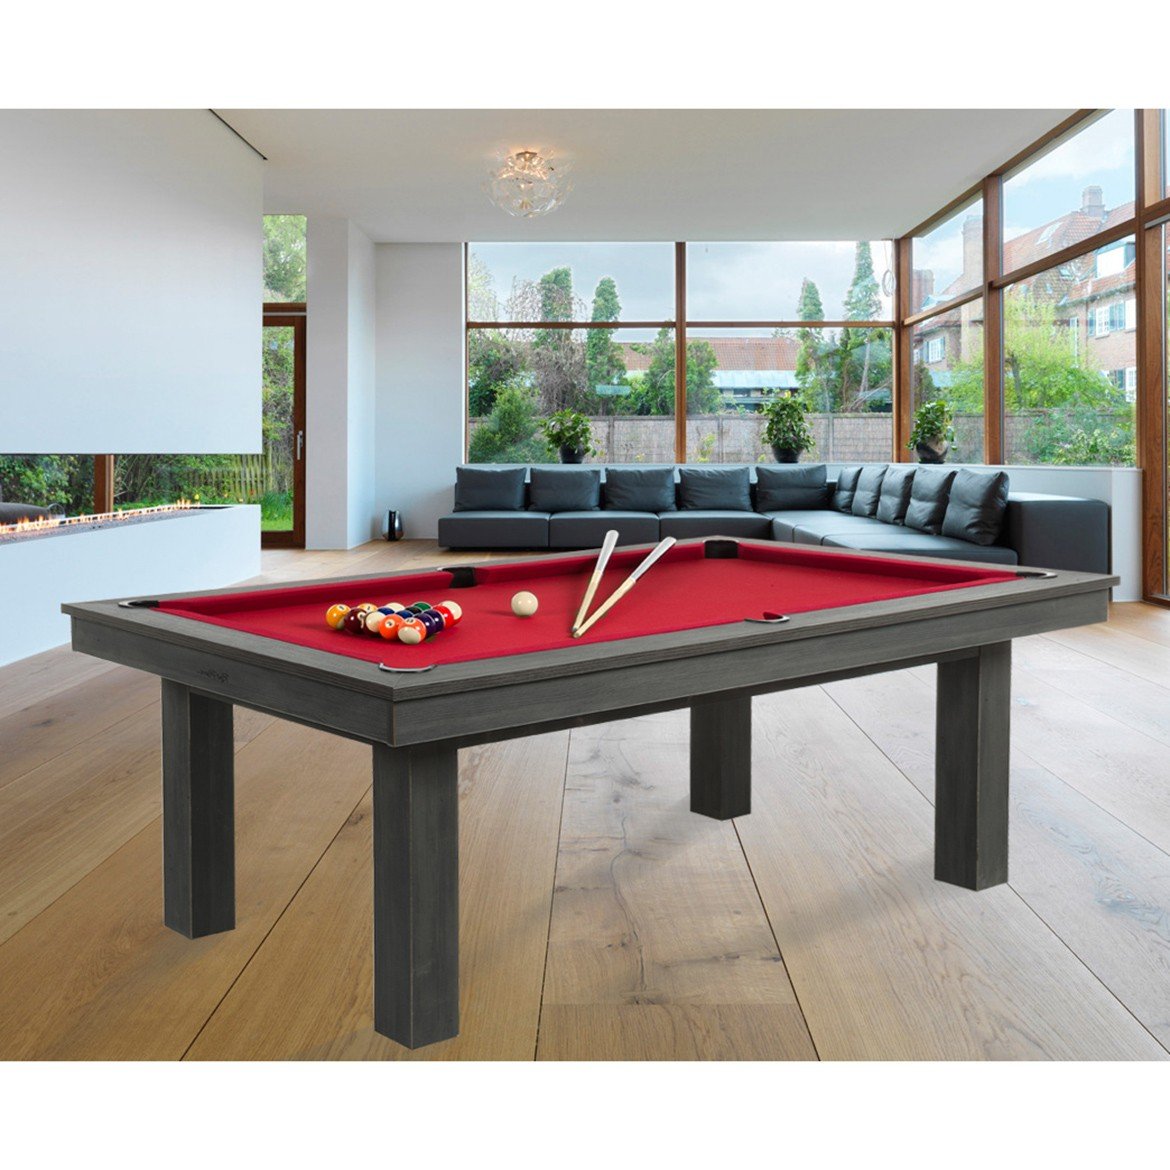 Picture of Rene Pierre Billiards Lafite Grey Pool Table with Dining Top